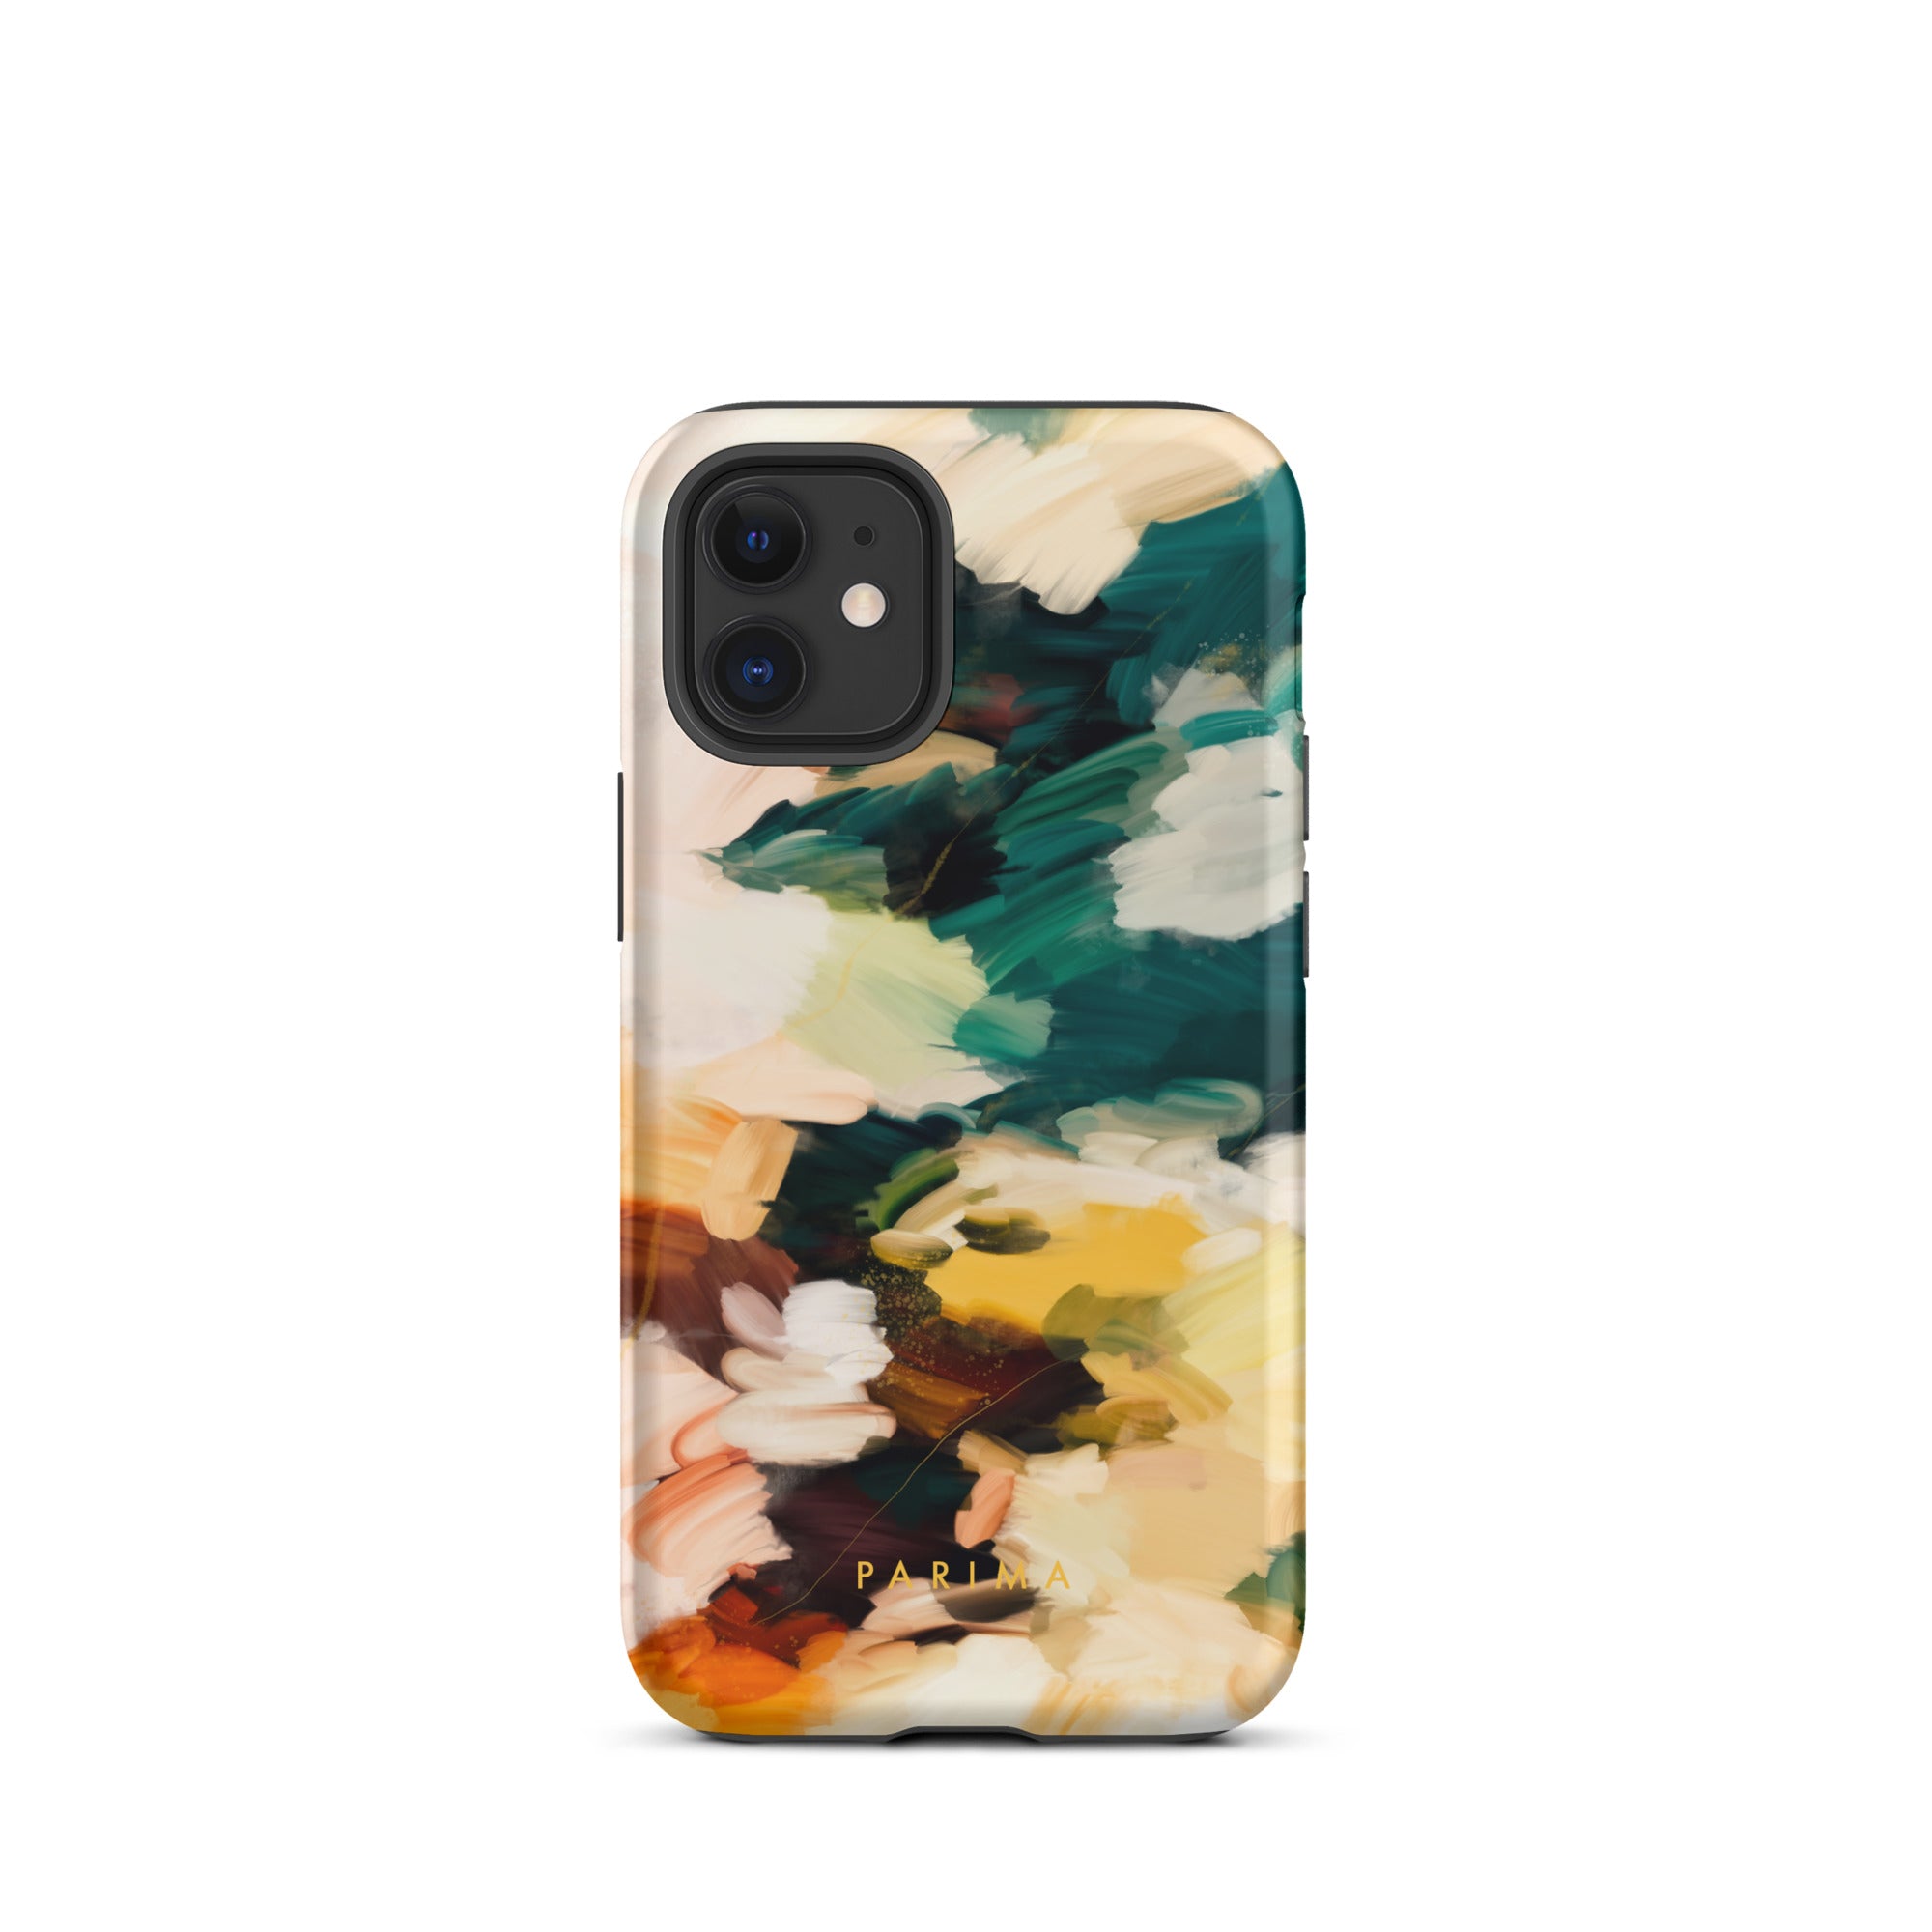 Cinque Terre, green and yellow abstract art - iPhone 12 Mini tough case by Parima Studio